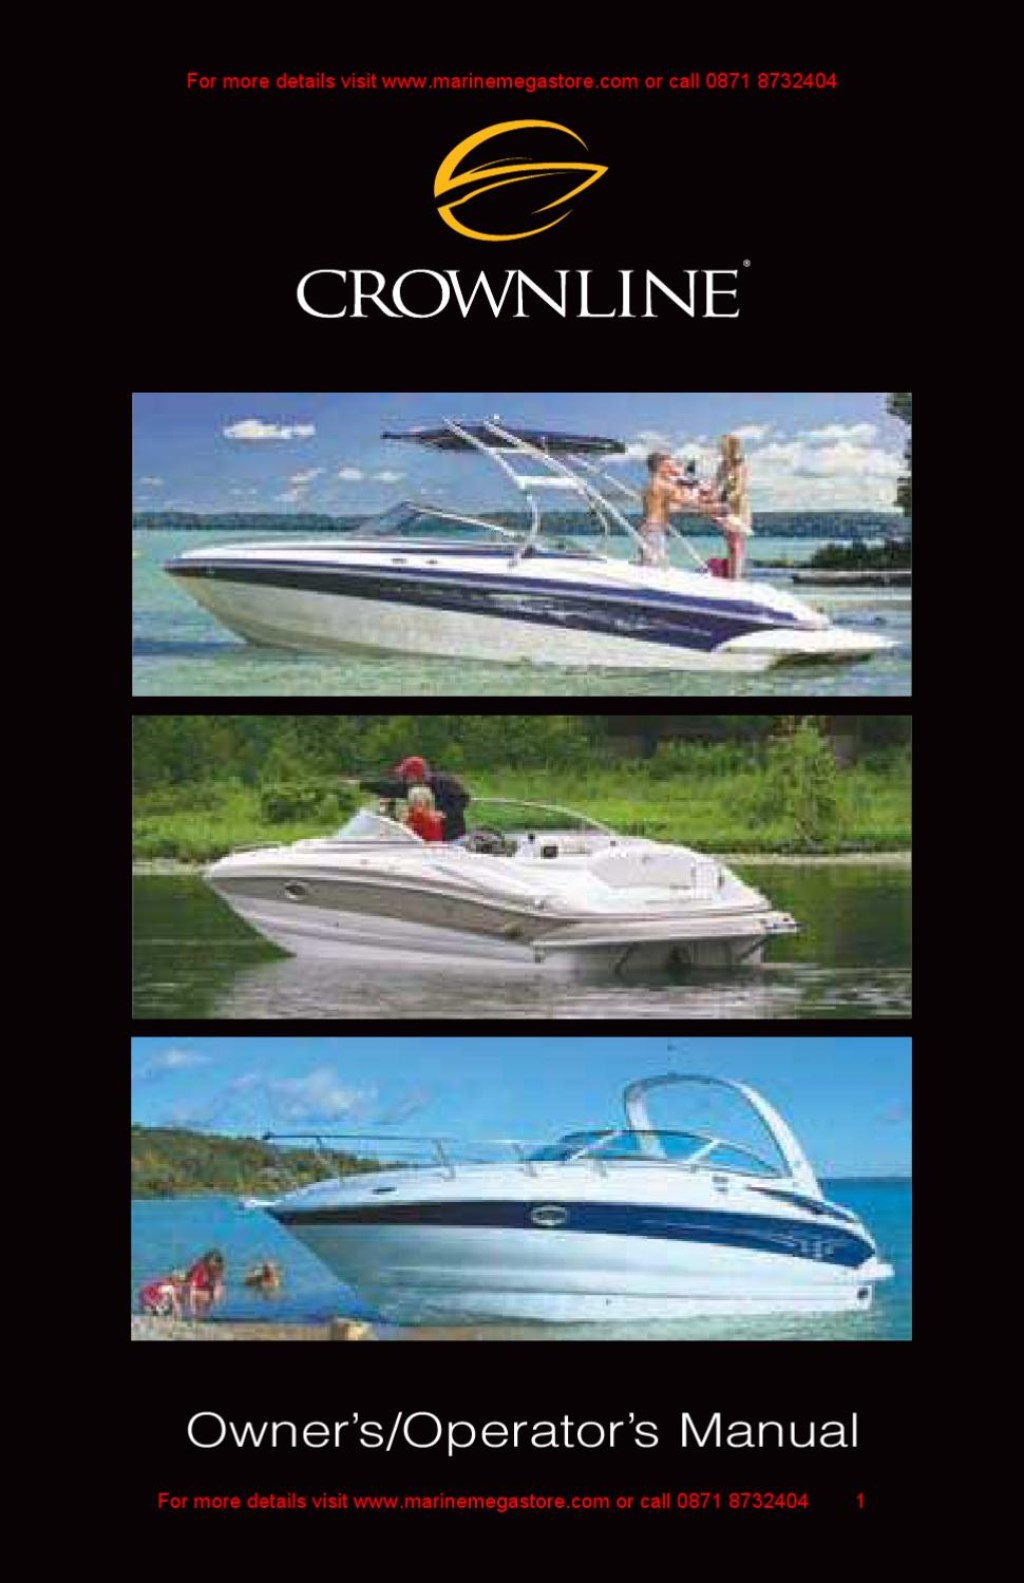 Picture of: Crownline-Owner’s Manual by Marine Mega Store Ltd – Issuu